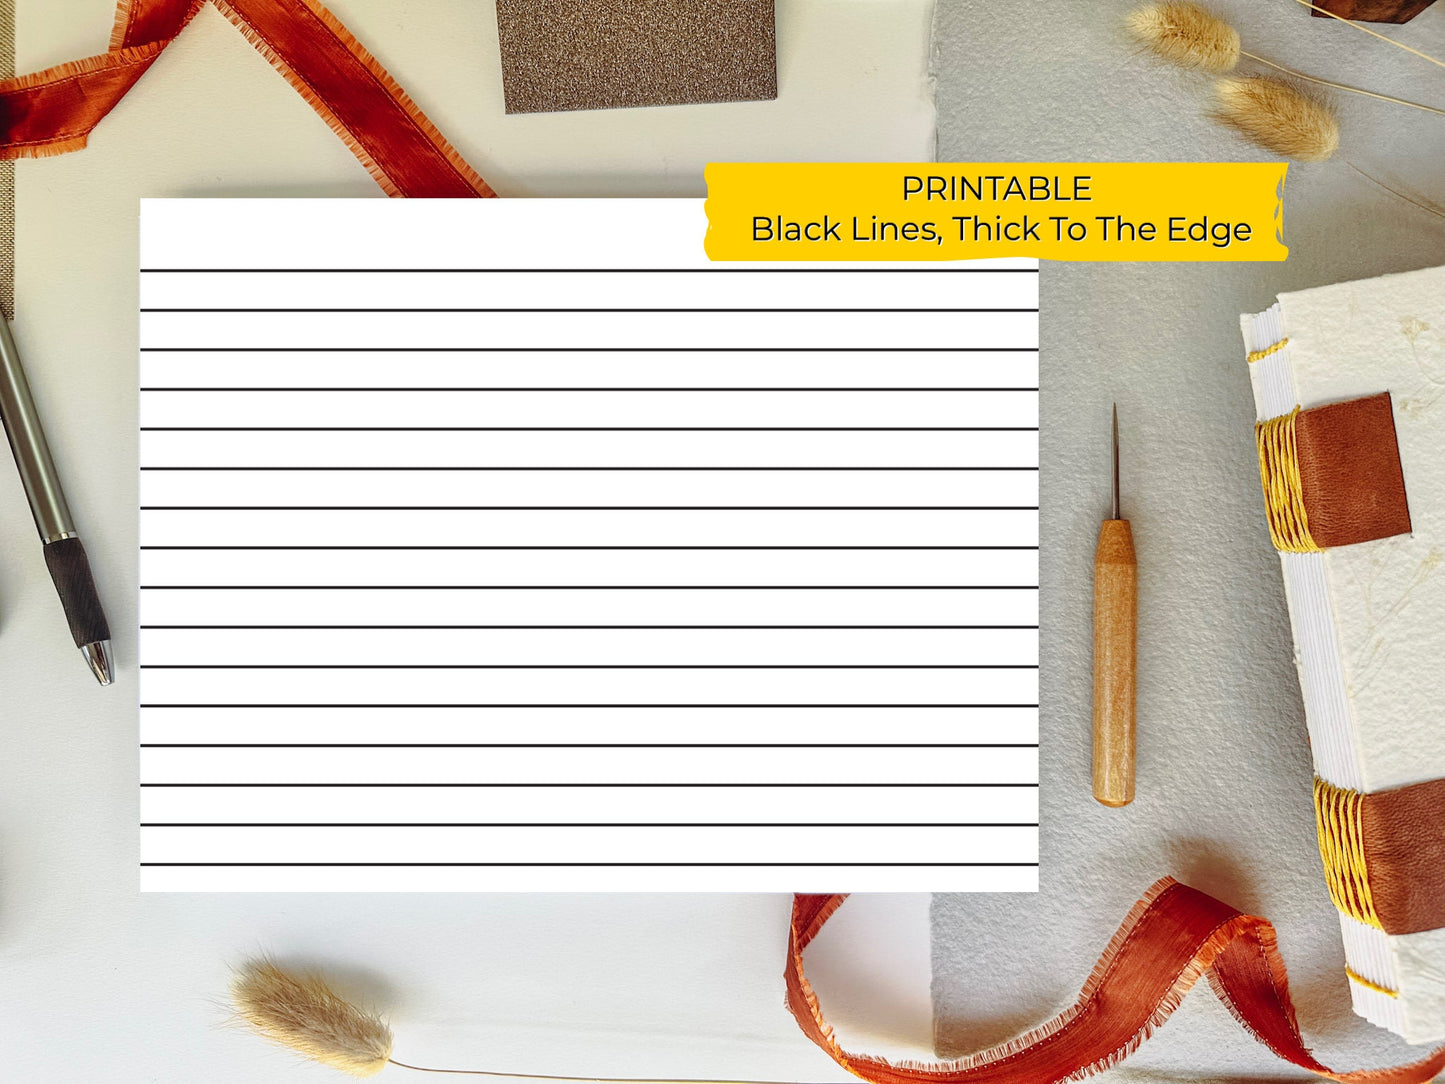 8.5 x 12 Thick To Edge LINED/RULED PRINTABLE Digital Book Binding Signature File - Black Lines